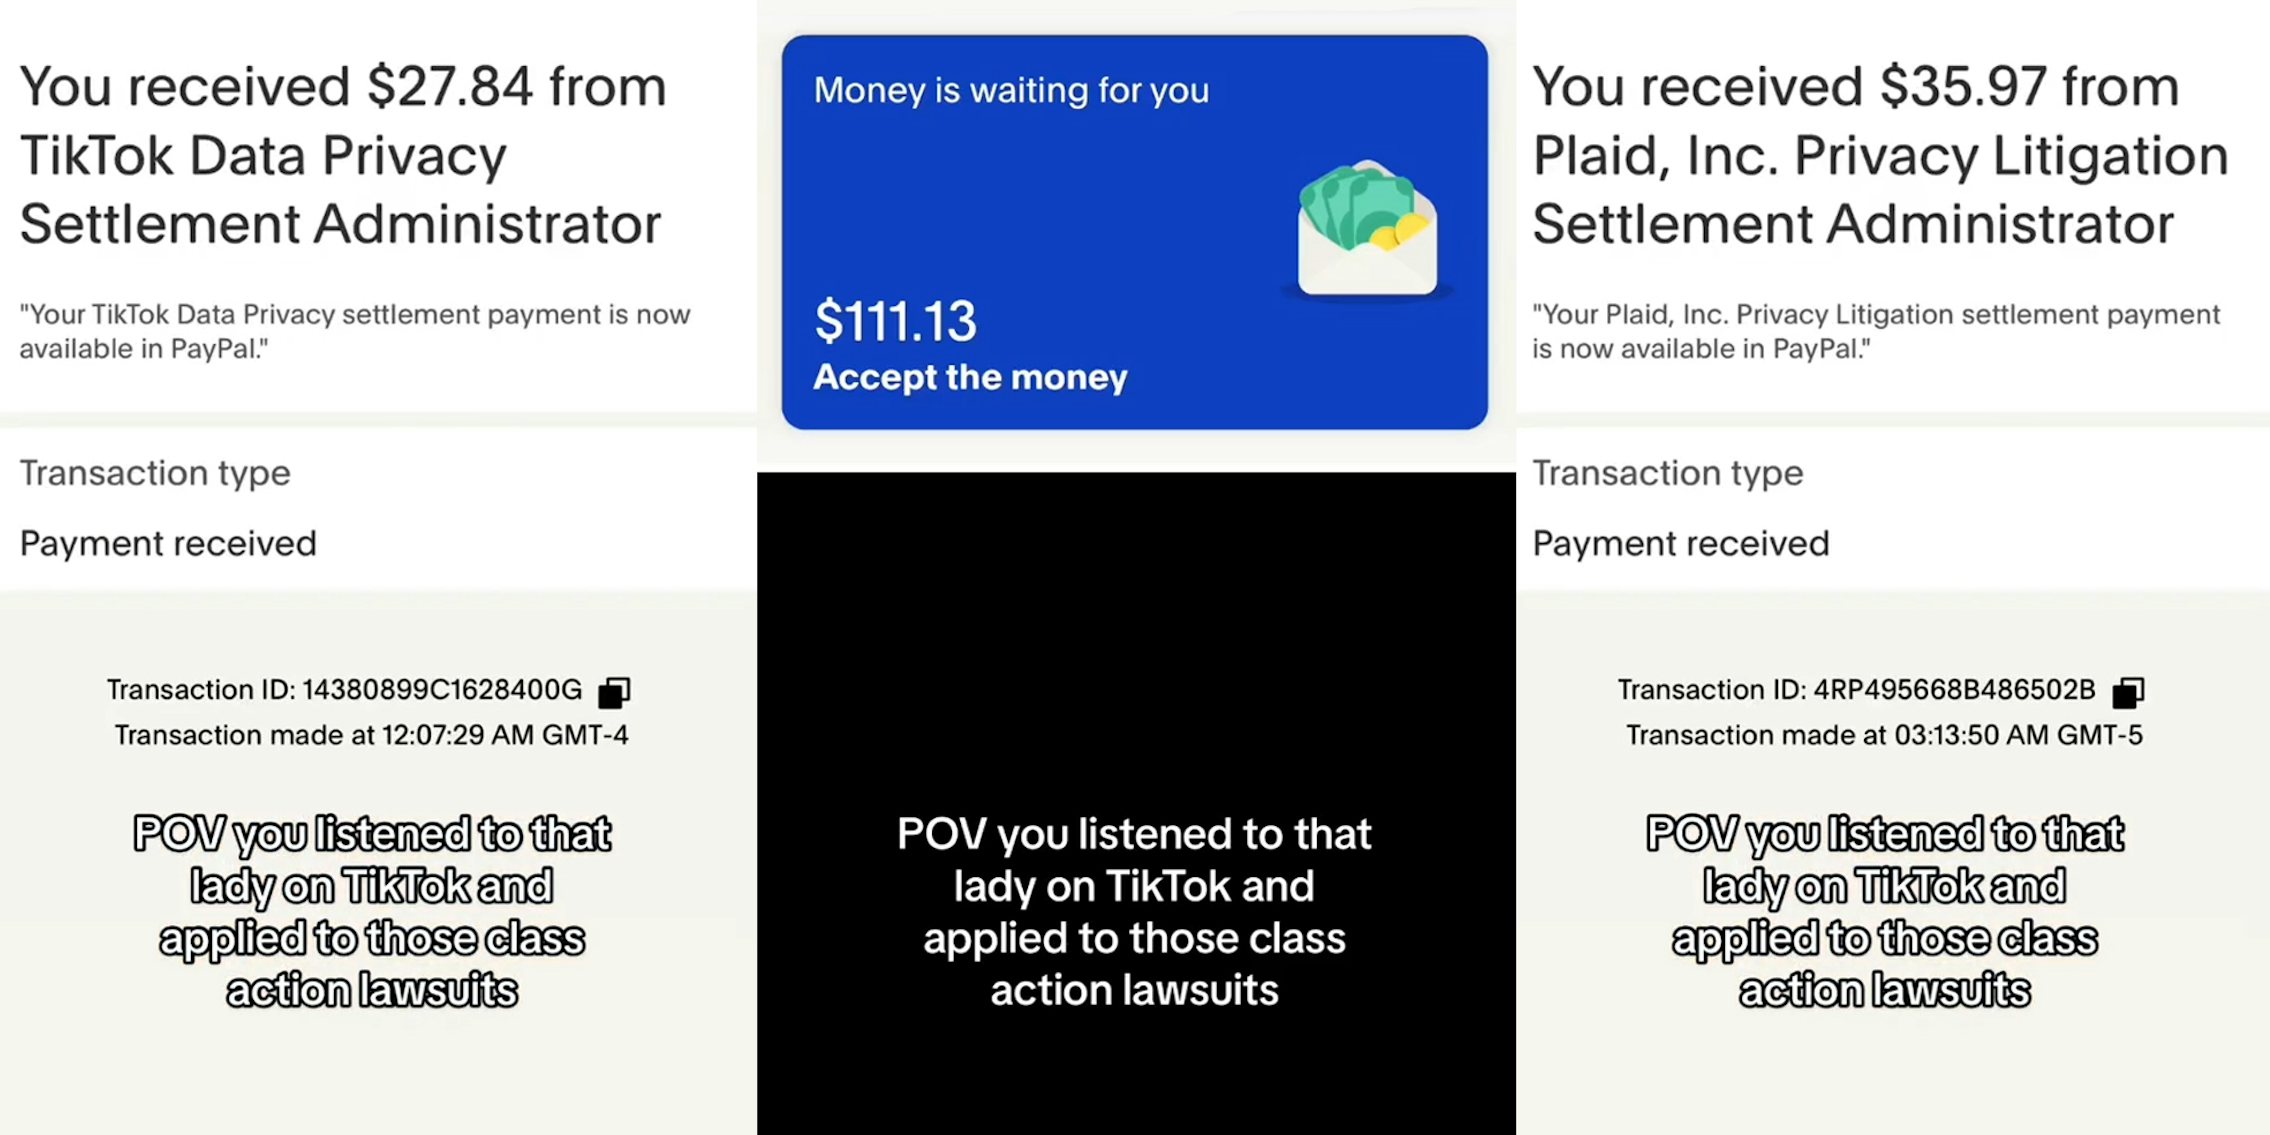 payment received notification 'You received $27.84 from TikTok Data Privacy Settlement Administrator' with caption 'POV you listened to that lady on TikTok and applied to those class action lawsuits' (l) Money is waiting for you $111.13 notification with caption 'POV you listened to that lady on TikTok and applied to those class action lawsuits' (c) payment received notification 'You received $35.97 from Plaid, Inc. Privacy Litigation Settlement Administrator' with caption 'POV you listened to that lady on TikTok and applied to those class action lawsuits' (r)